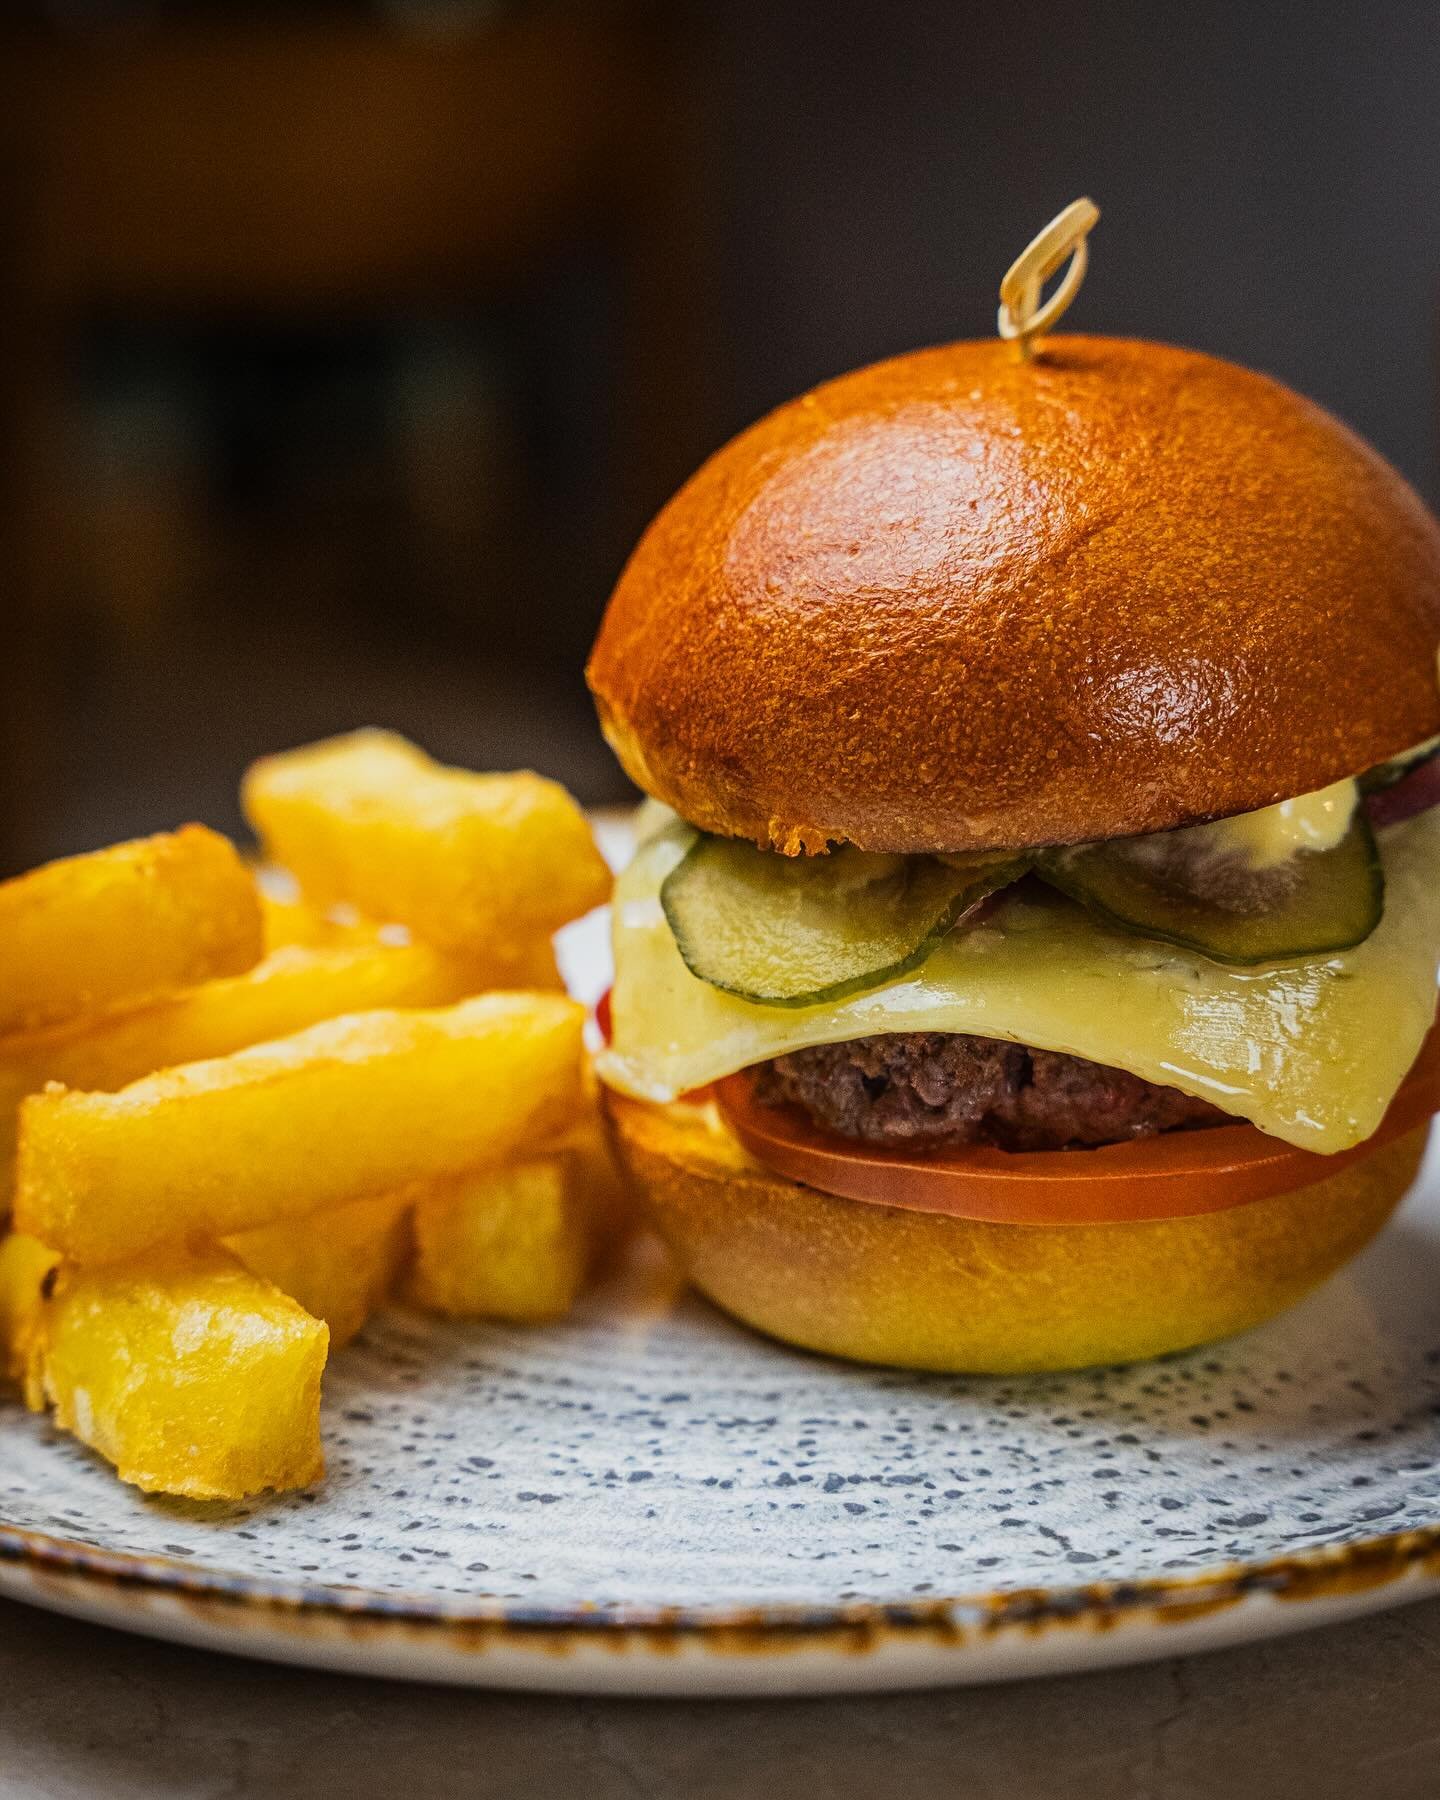 We serve our Gracie&rsquo;s beef burger with pickles, homemade onion chutney &amp; delicious smoked apple cheddar 🍔 With a side of triple cooked chips of course!
.
.
.
.
#EnglandsGrace #burger #lunch #dinner #burgerlover #chips #stjohnswood #londonf